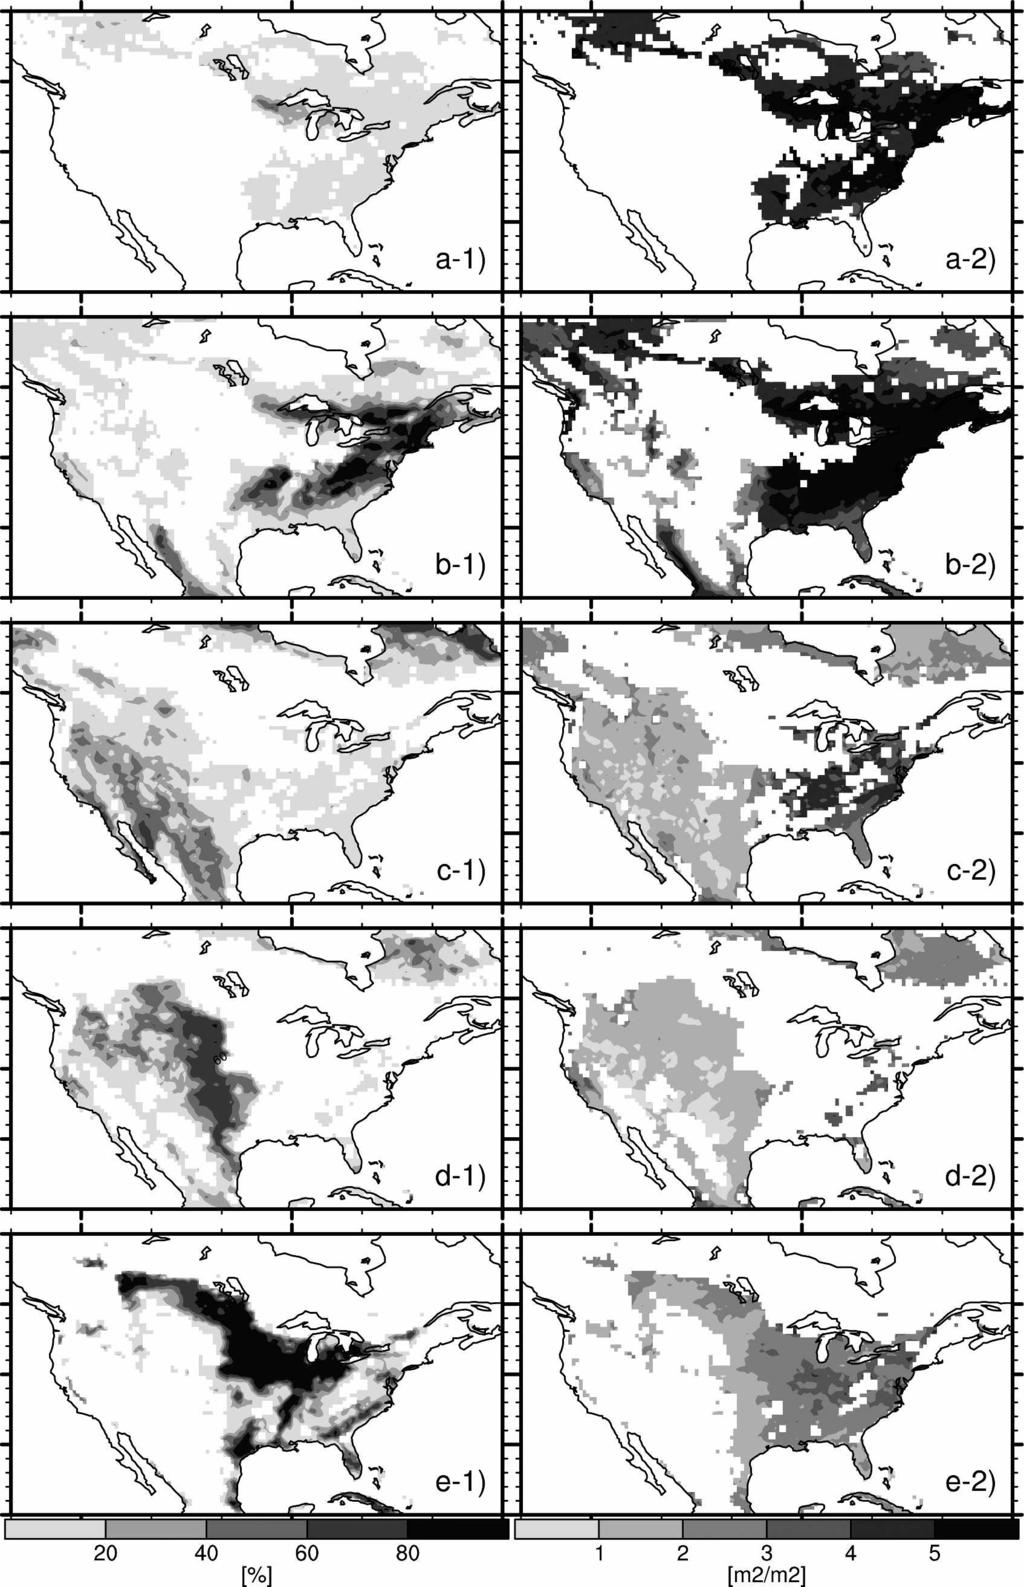 JUNE 2007 K I M A N D WANG 537 FIG. 2. Percentage of the grid cell occupied by and maximum LAI of (a) needleleaf trees, (b) broadleaf trees, (c) shrubs, (d) grasses, and (e) crops on 0.5 0.5 map.